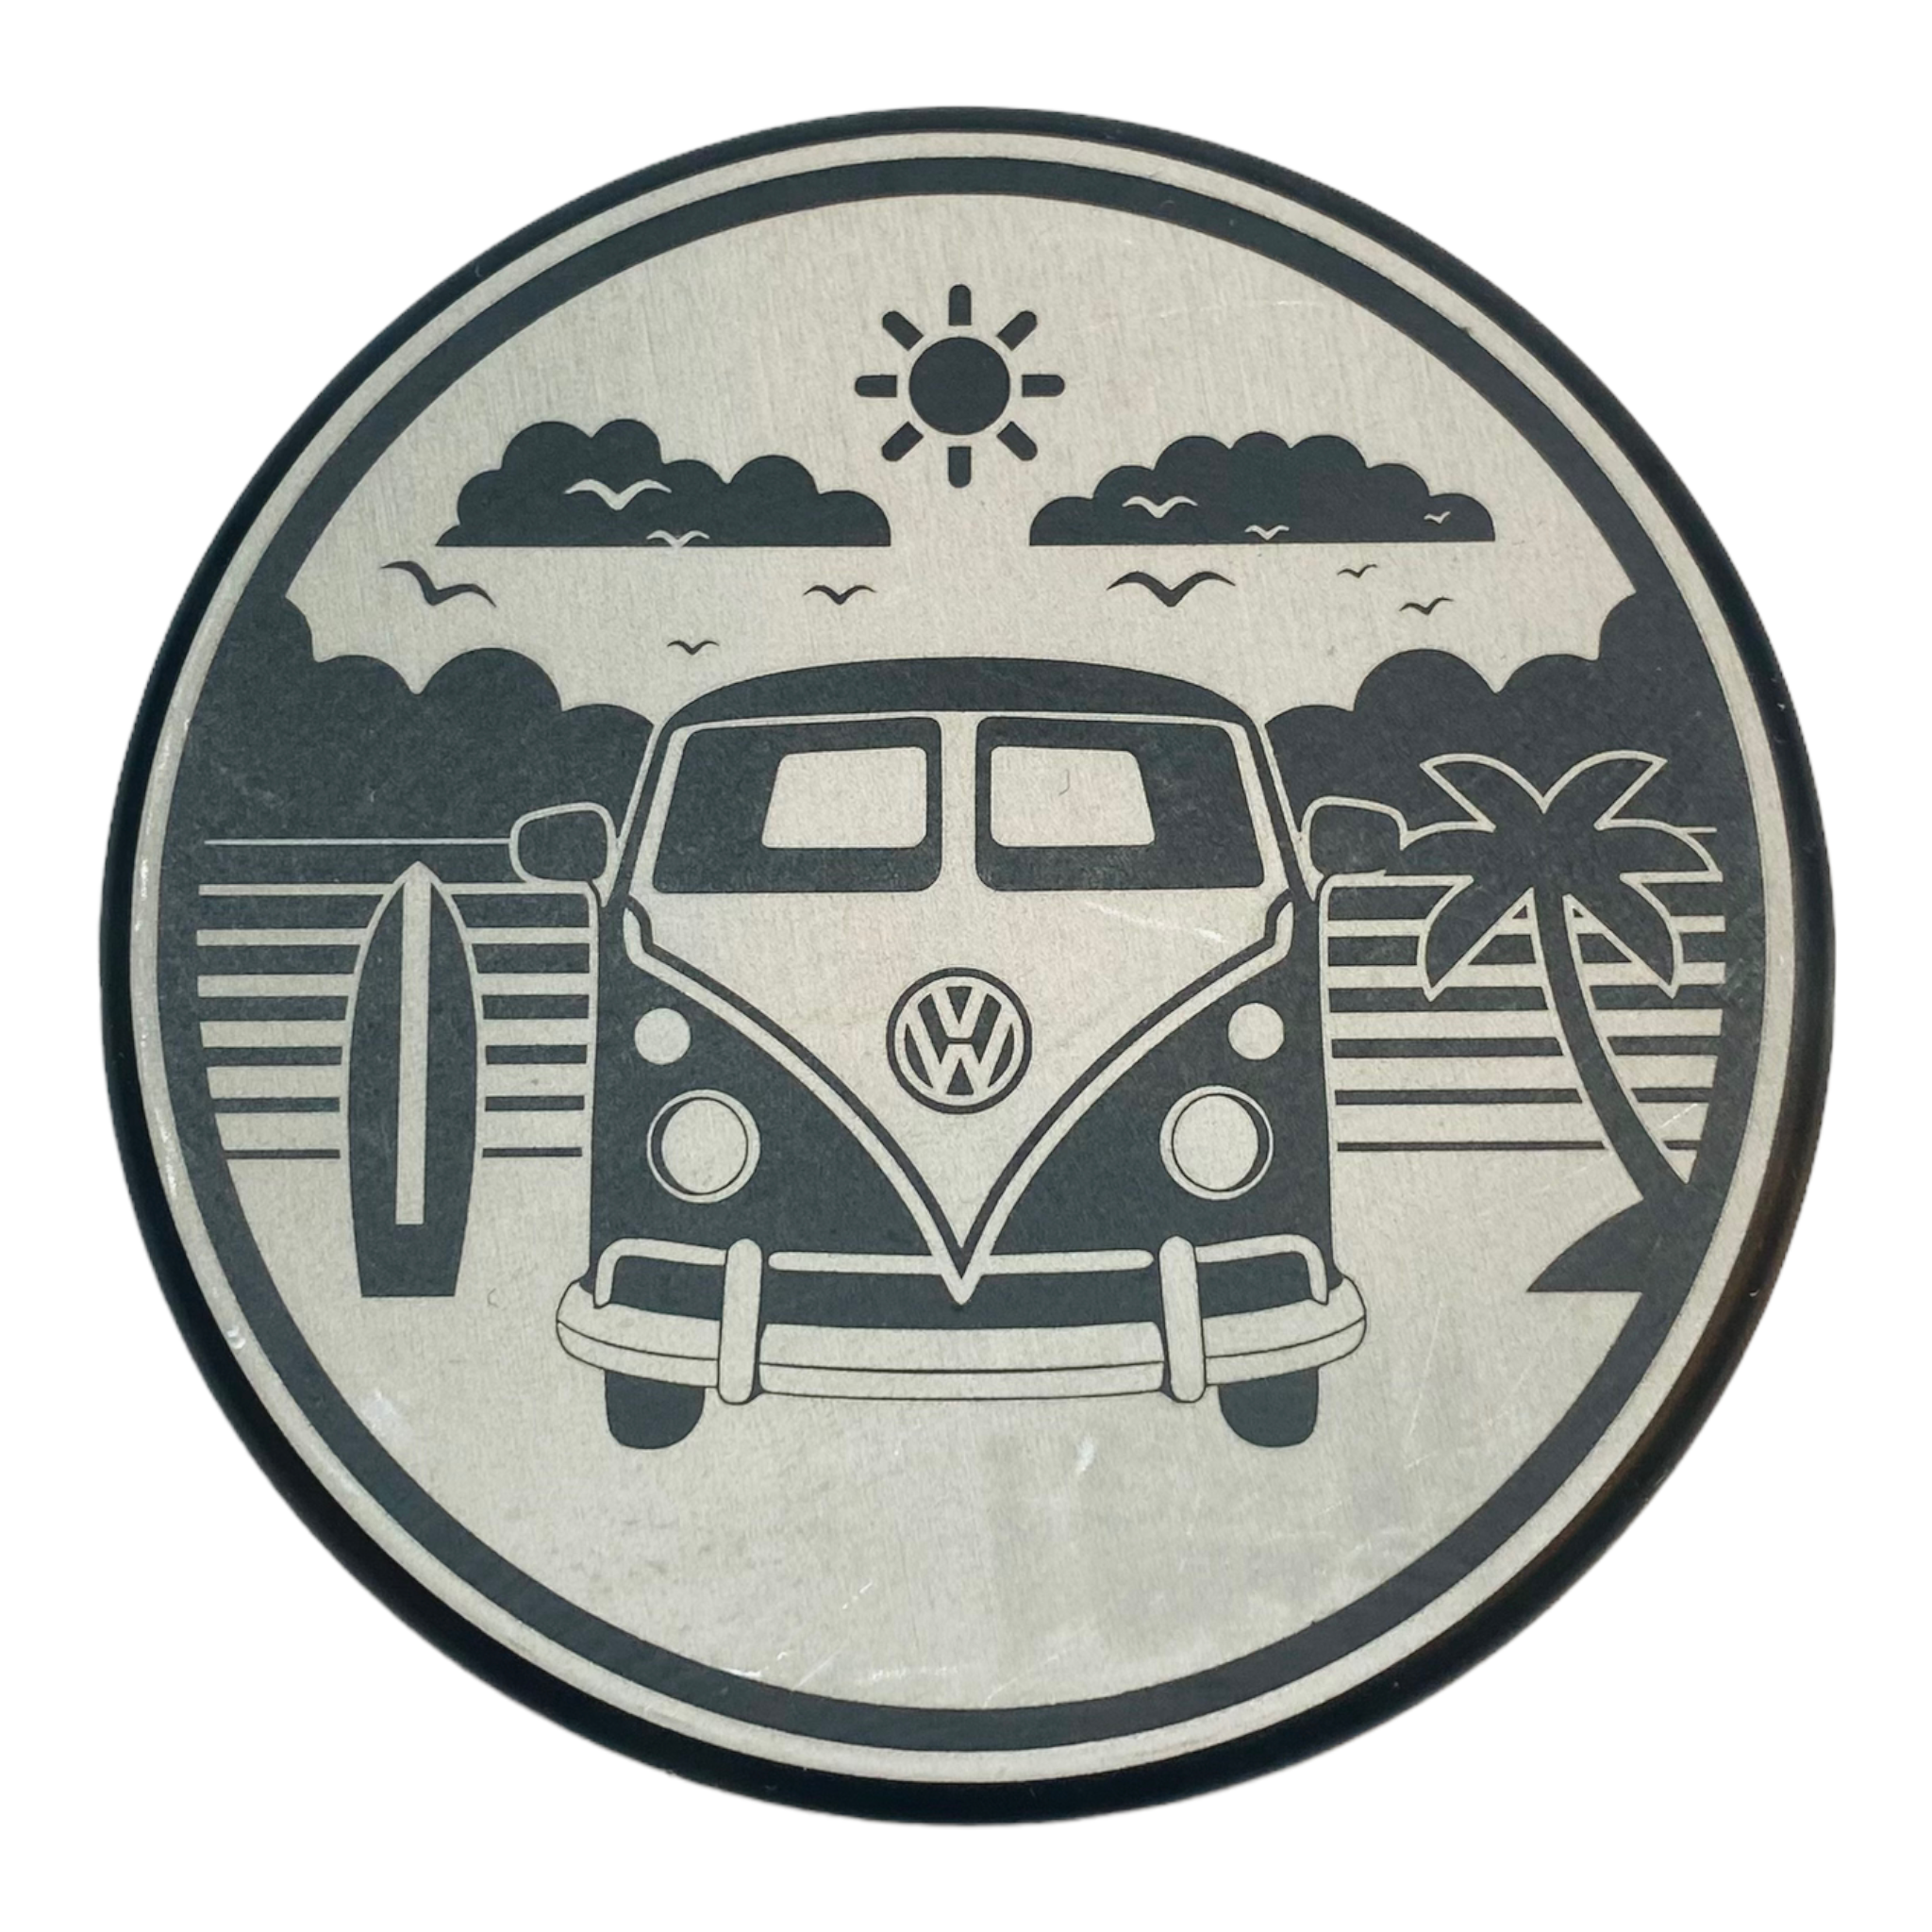 Tahoe Grinders - Black Anodized Aluminum Large Two Piece Herb Grinder With VW Bus On Beach